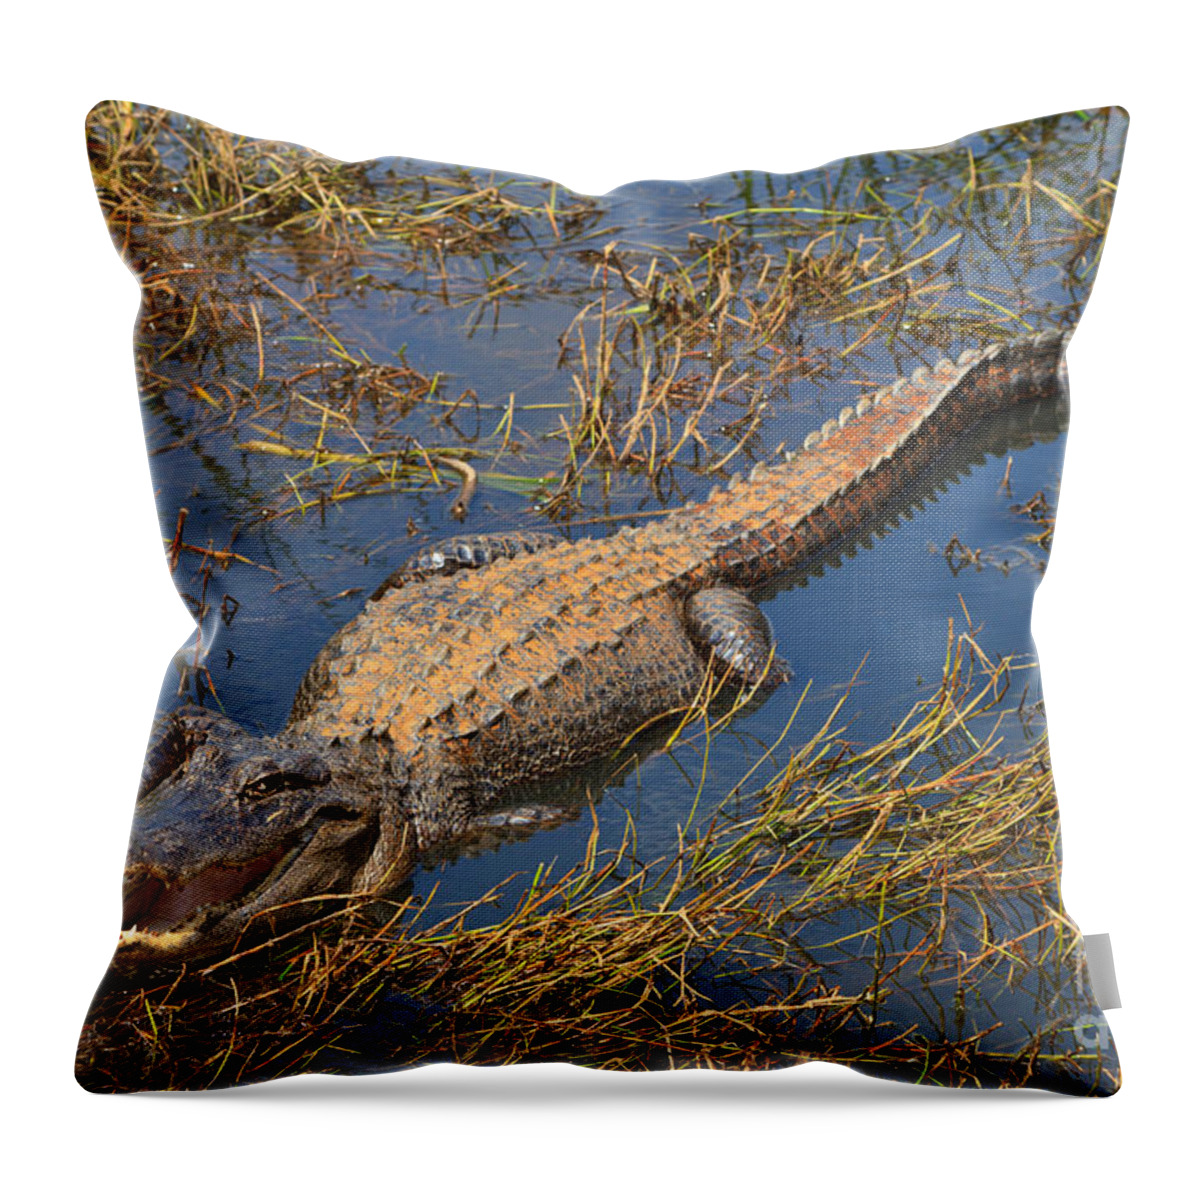 American Throw Pillow featuring the photograph American Alligator by Louise Heusinkveld